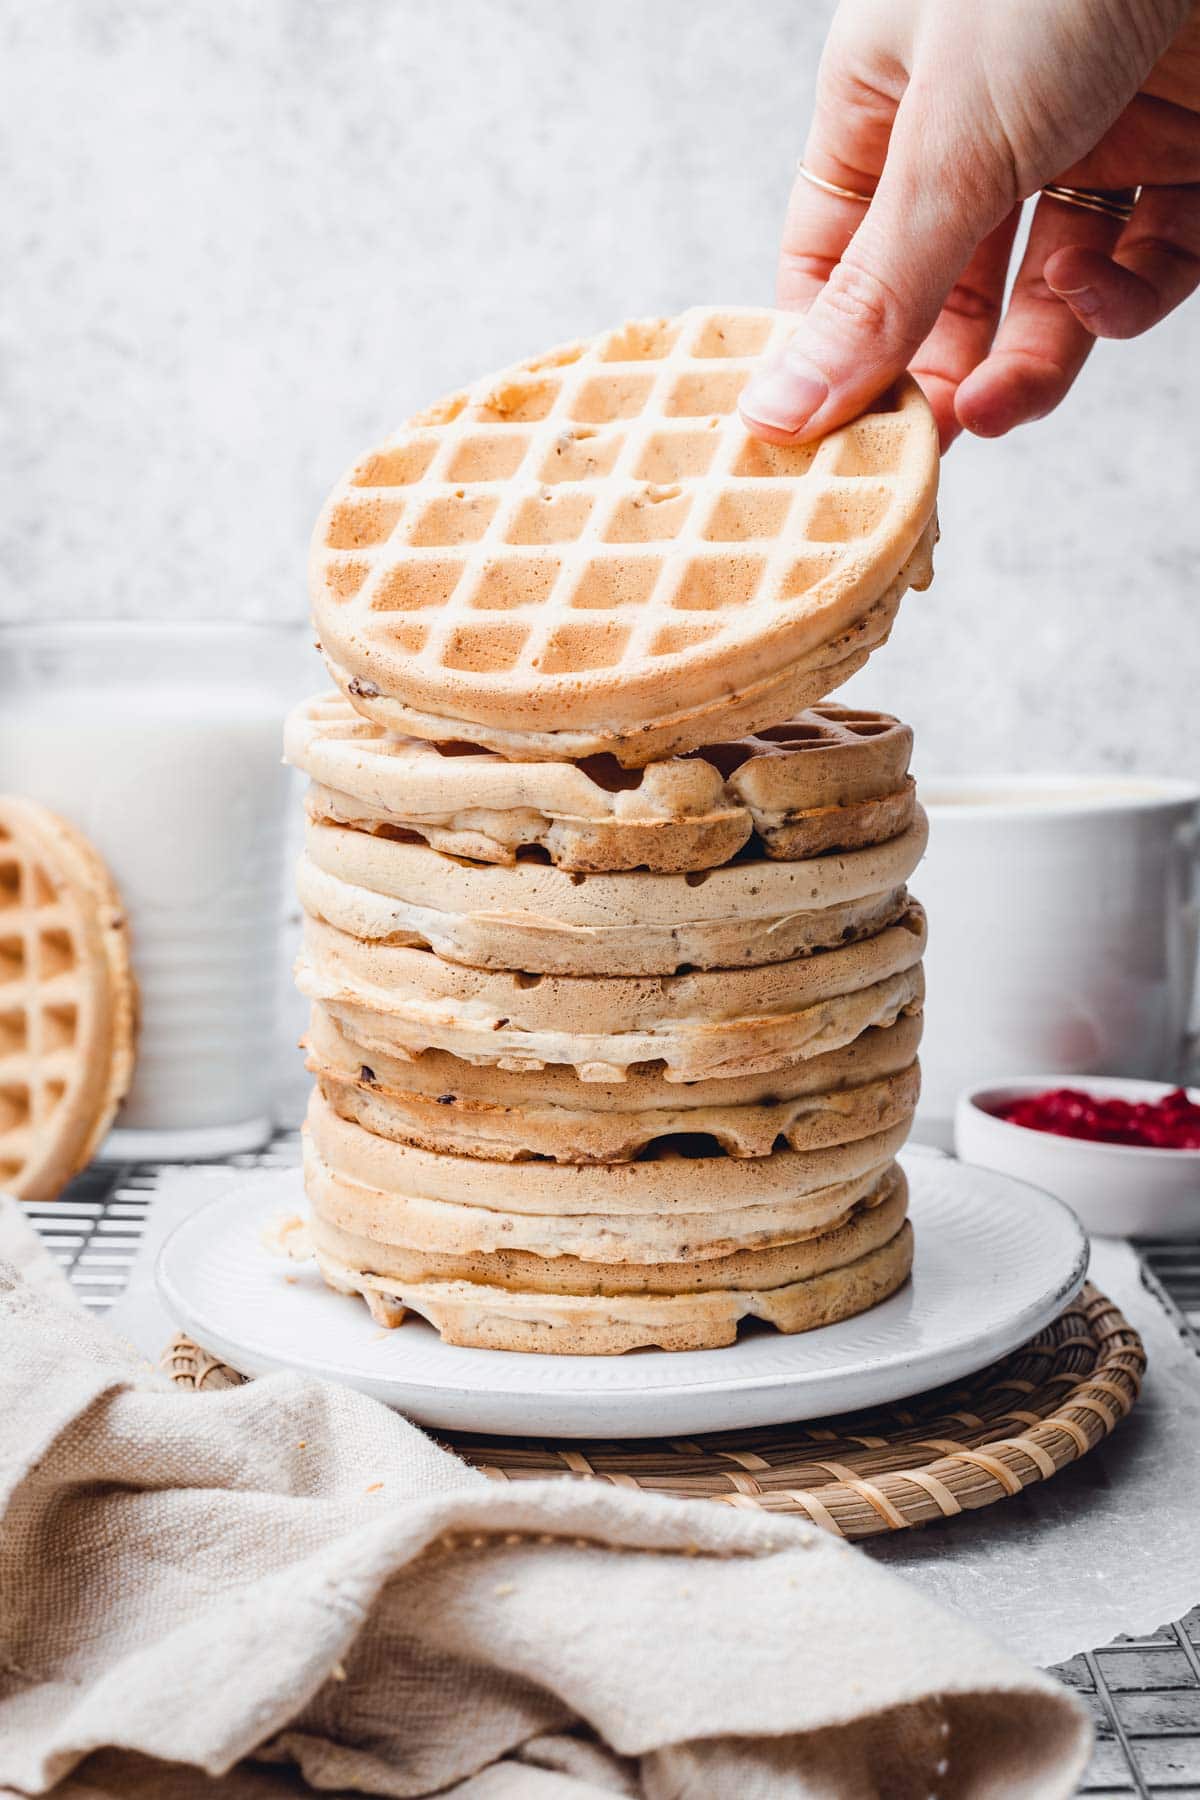 A hand reaching out for a waffle on top of a large waffle stack placed on a round plate.